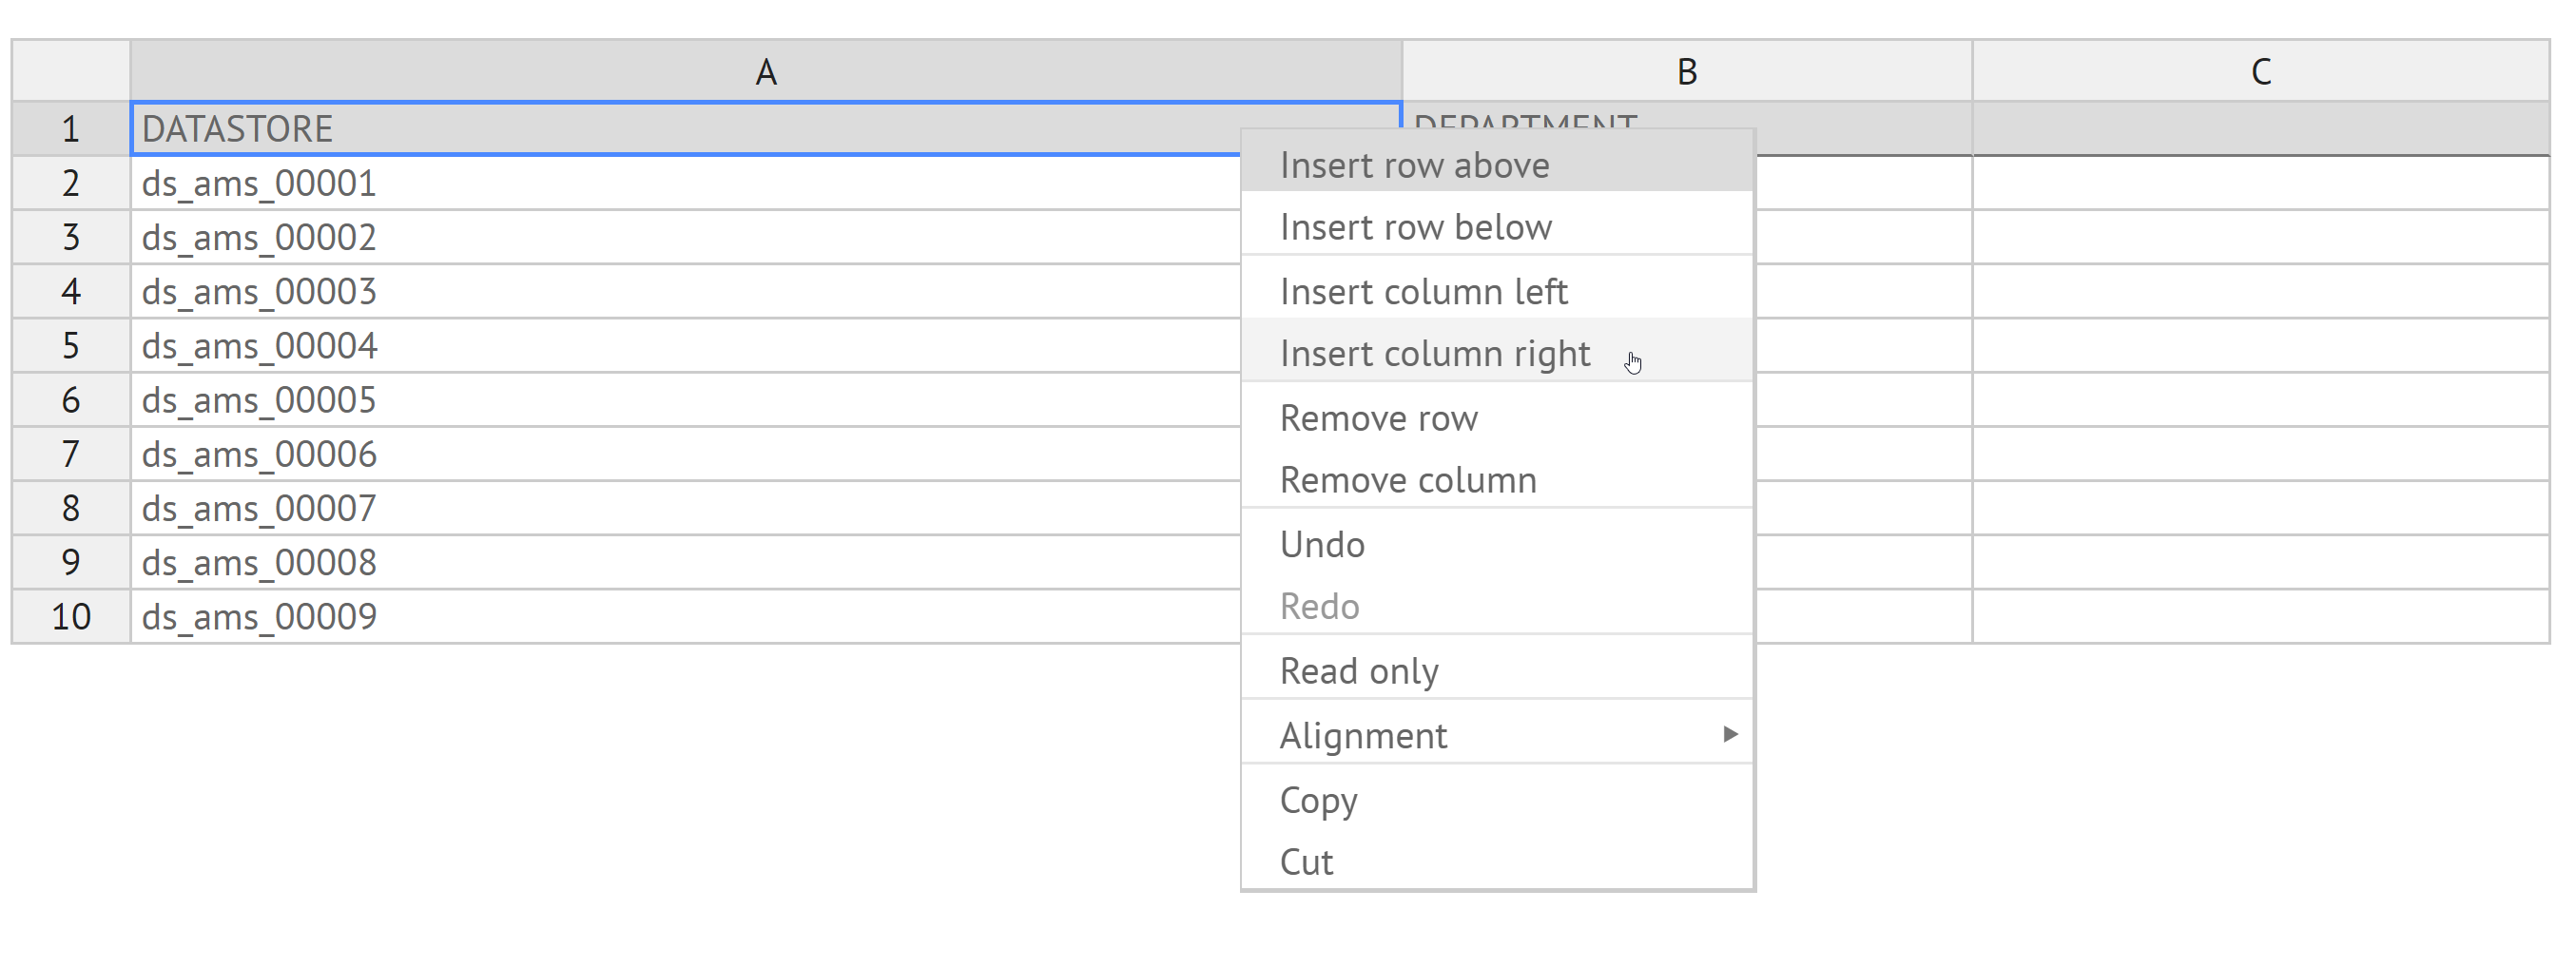 Adding and removing columns and rows